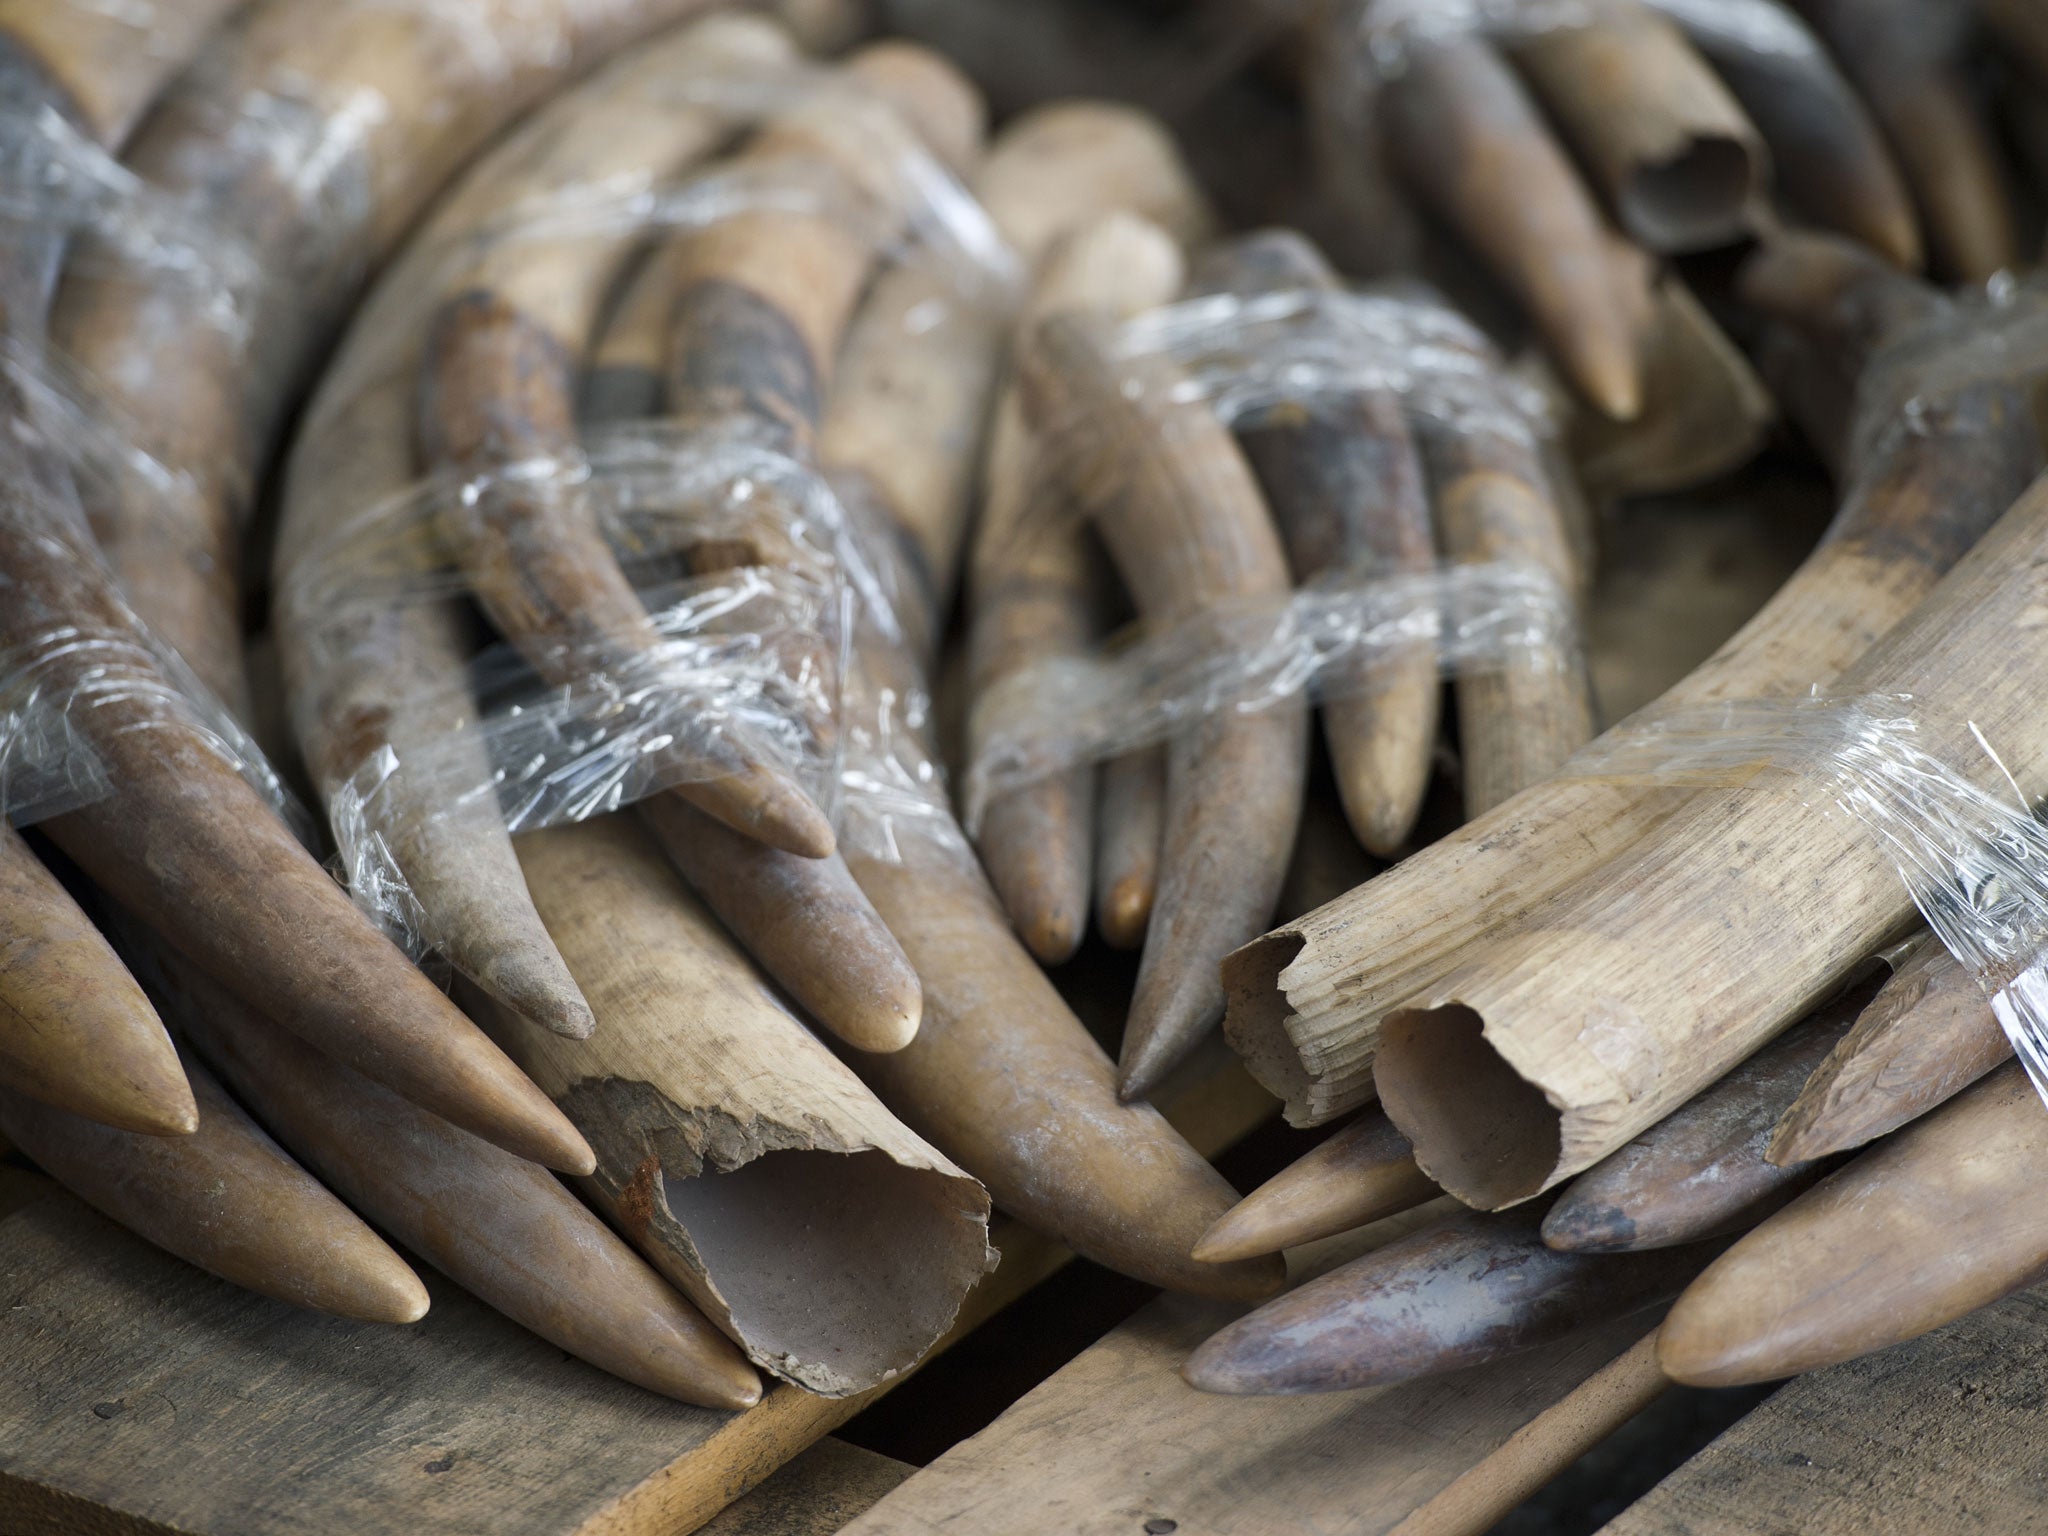 Seized ivory tusks in Hong Kong